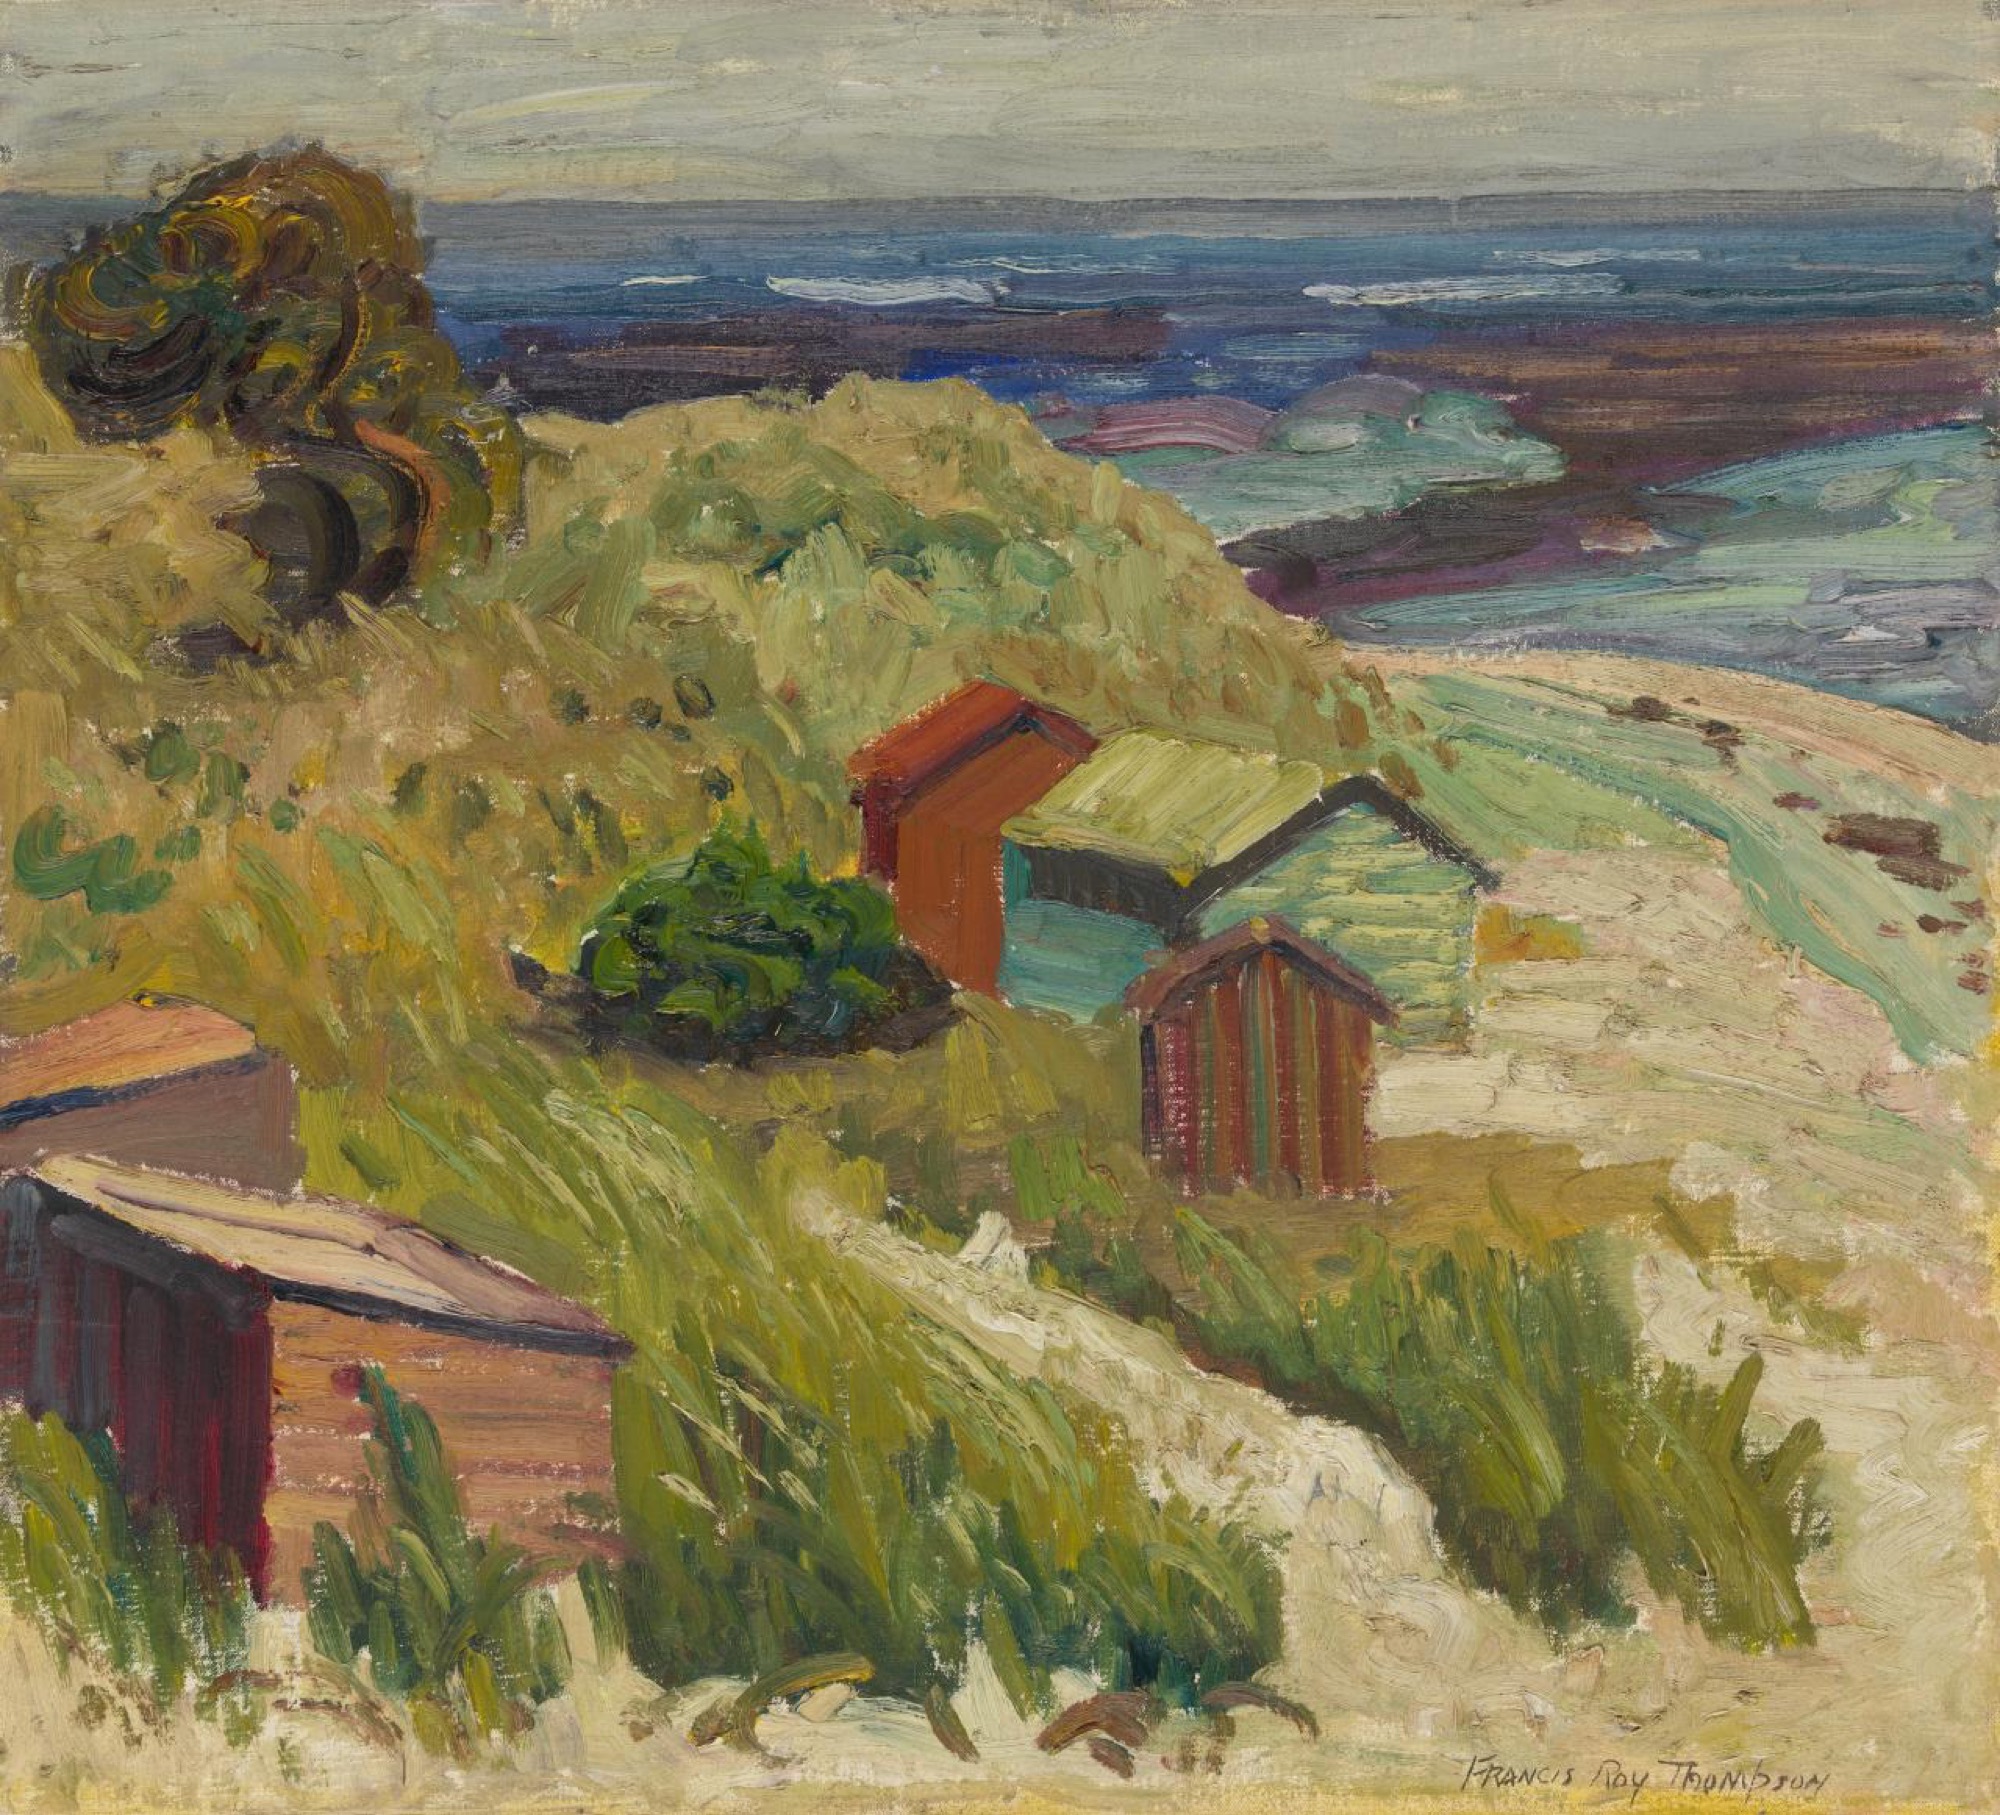 Francis Roy Thompson, <em>The shore at Flinders</em>, 1947, oil on canvas, 51.4 x 56.6 cm. Melbourne: National Gallery of Victoria.